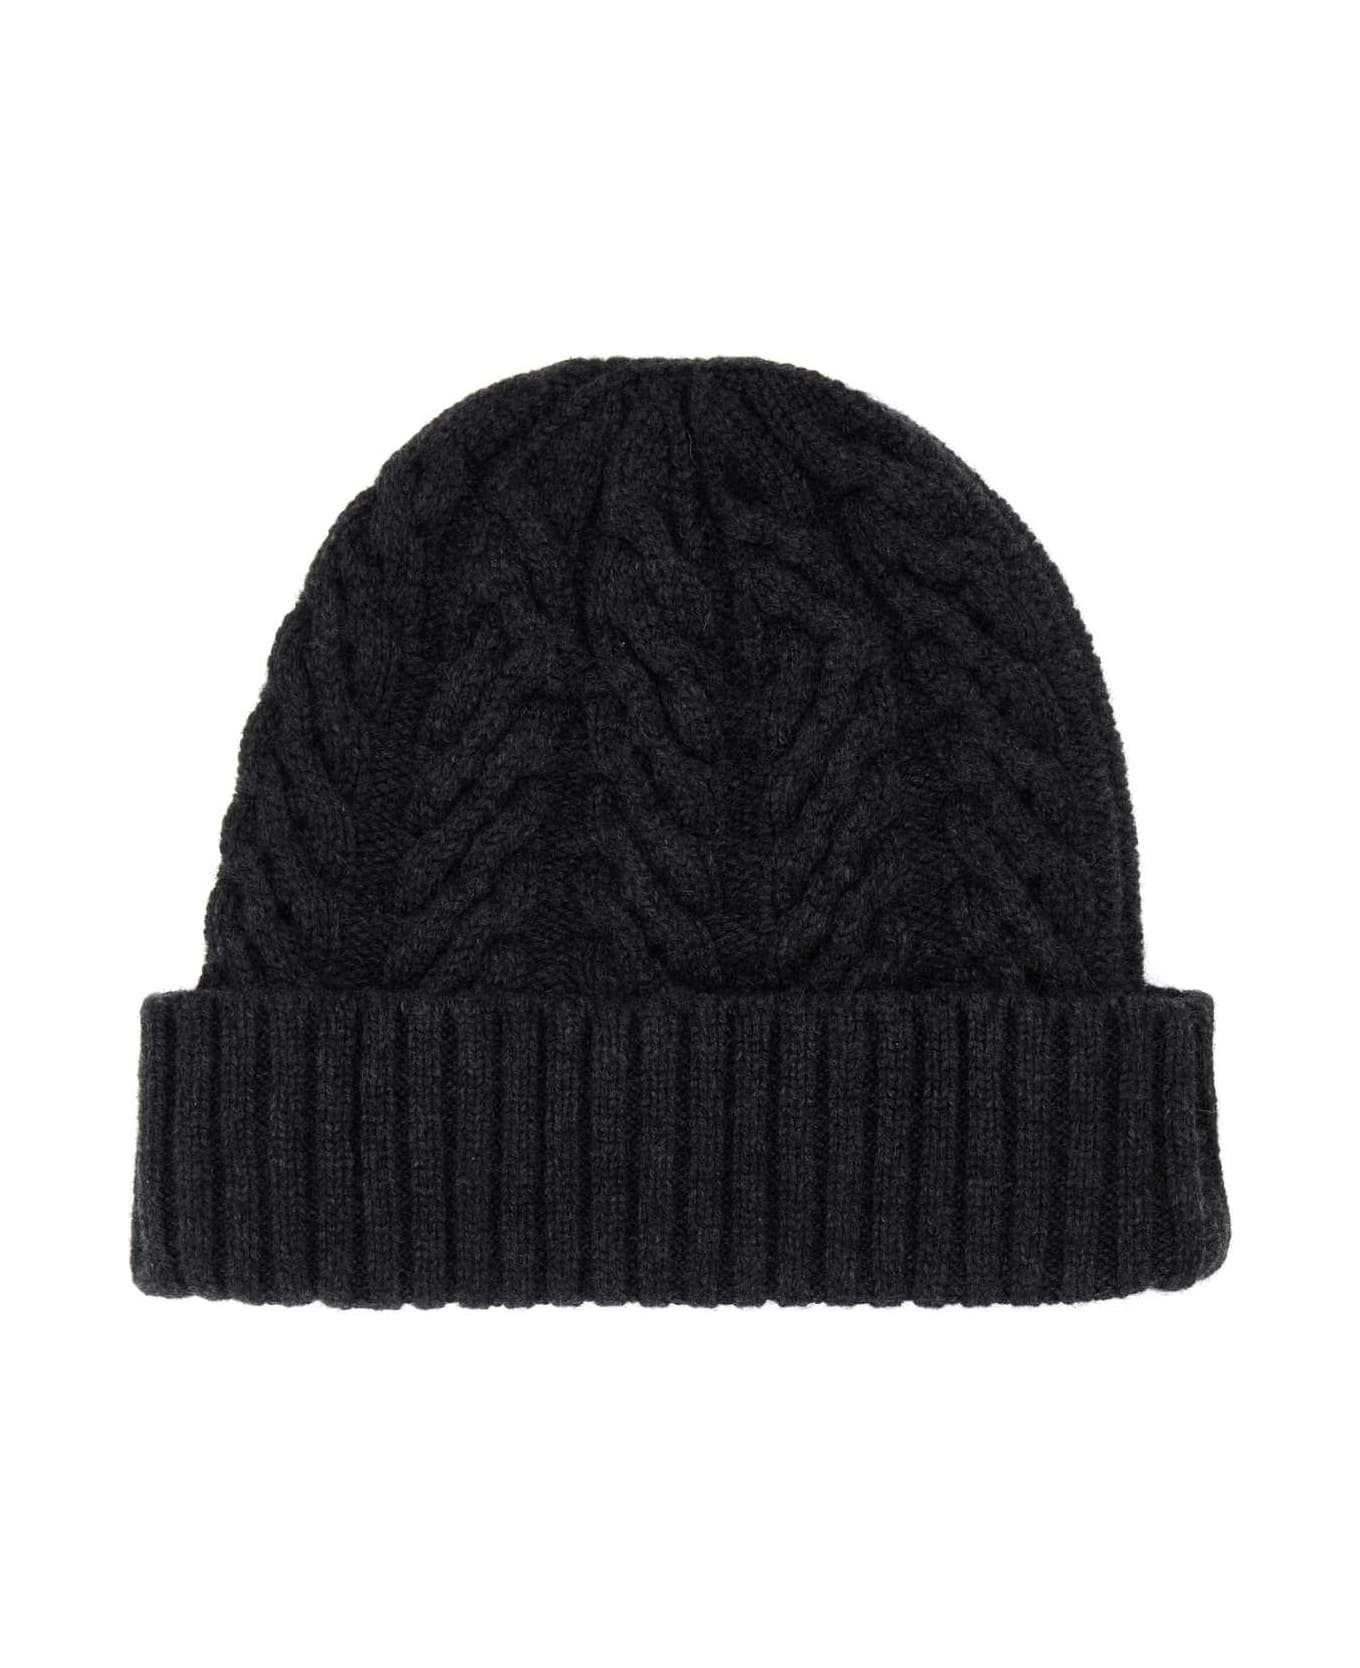 Moorer Charcoal Cashmere Beanie Hat - CARBON 帽子